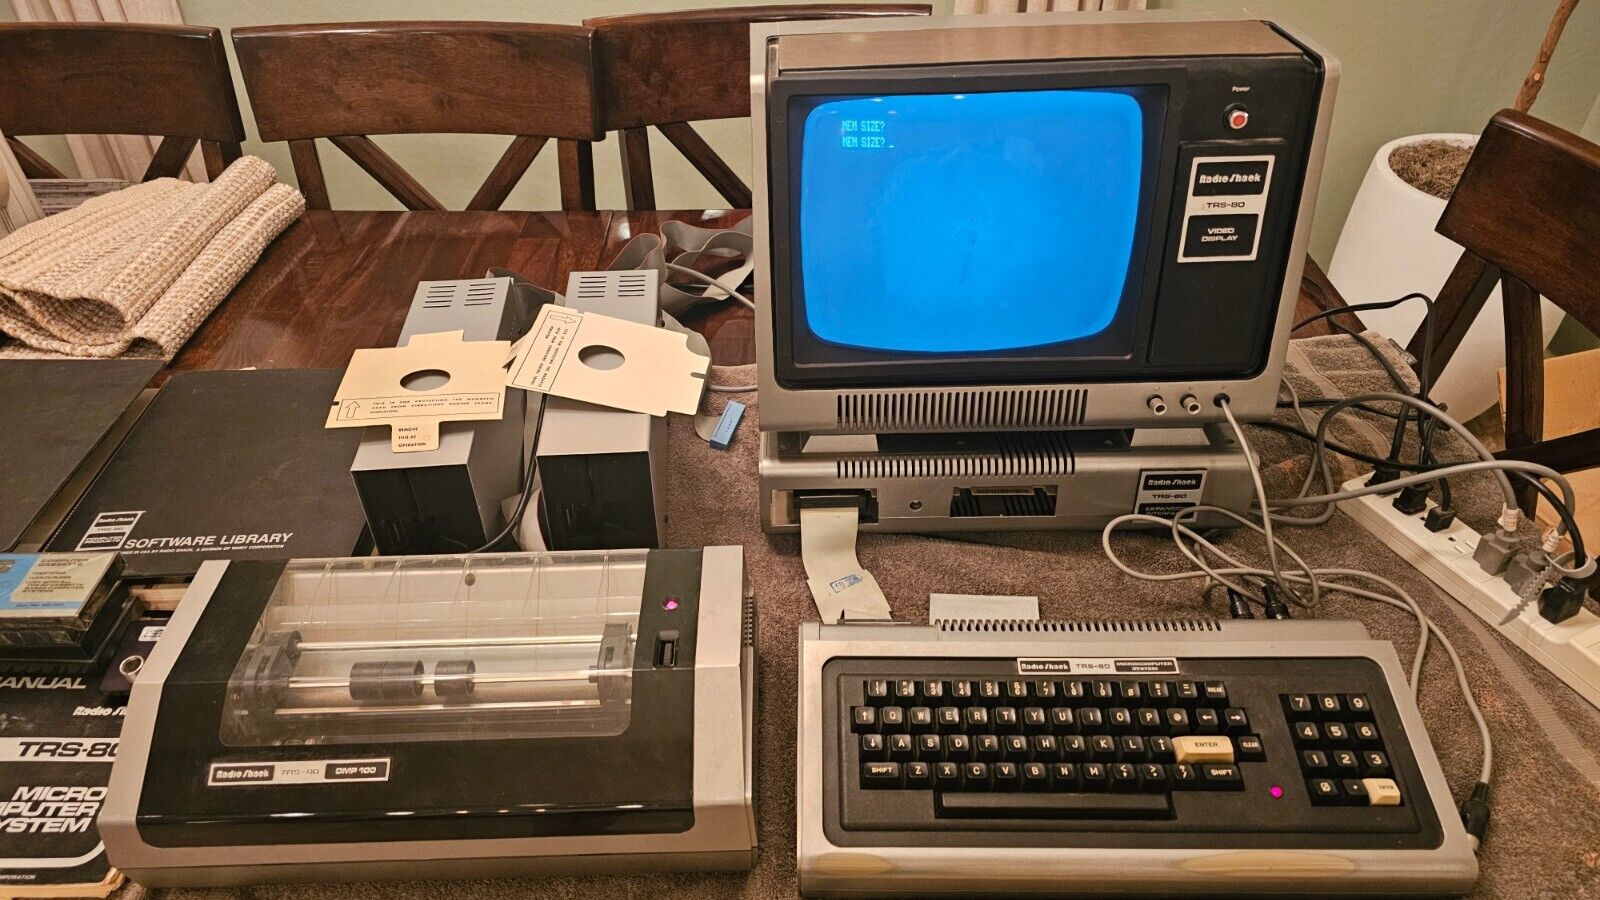 Radioshack TRS-80 Model 1 Computer system with many accessories